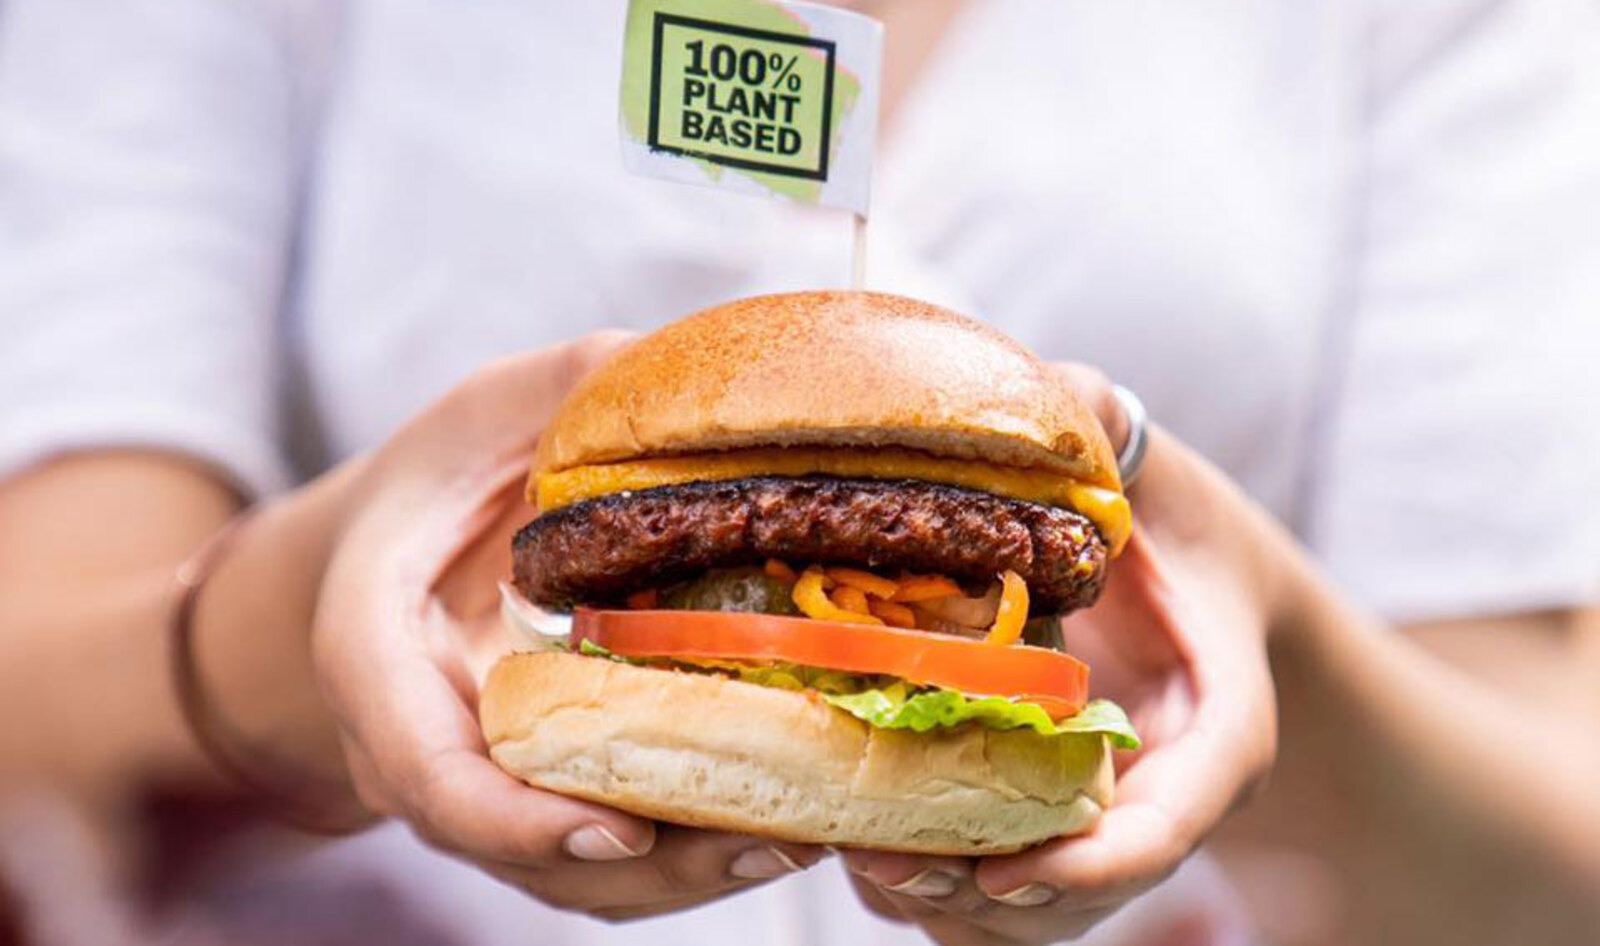 UK’s Largest Meat Market to Offer Vegan Burgers For the First Time in 800 Years